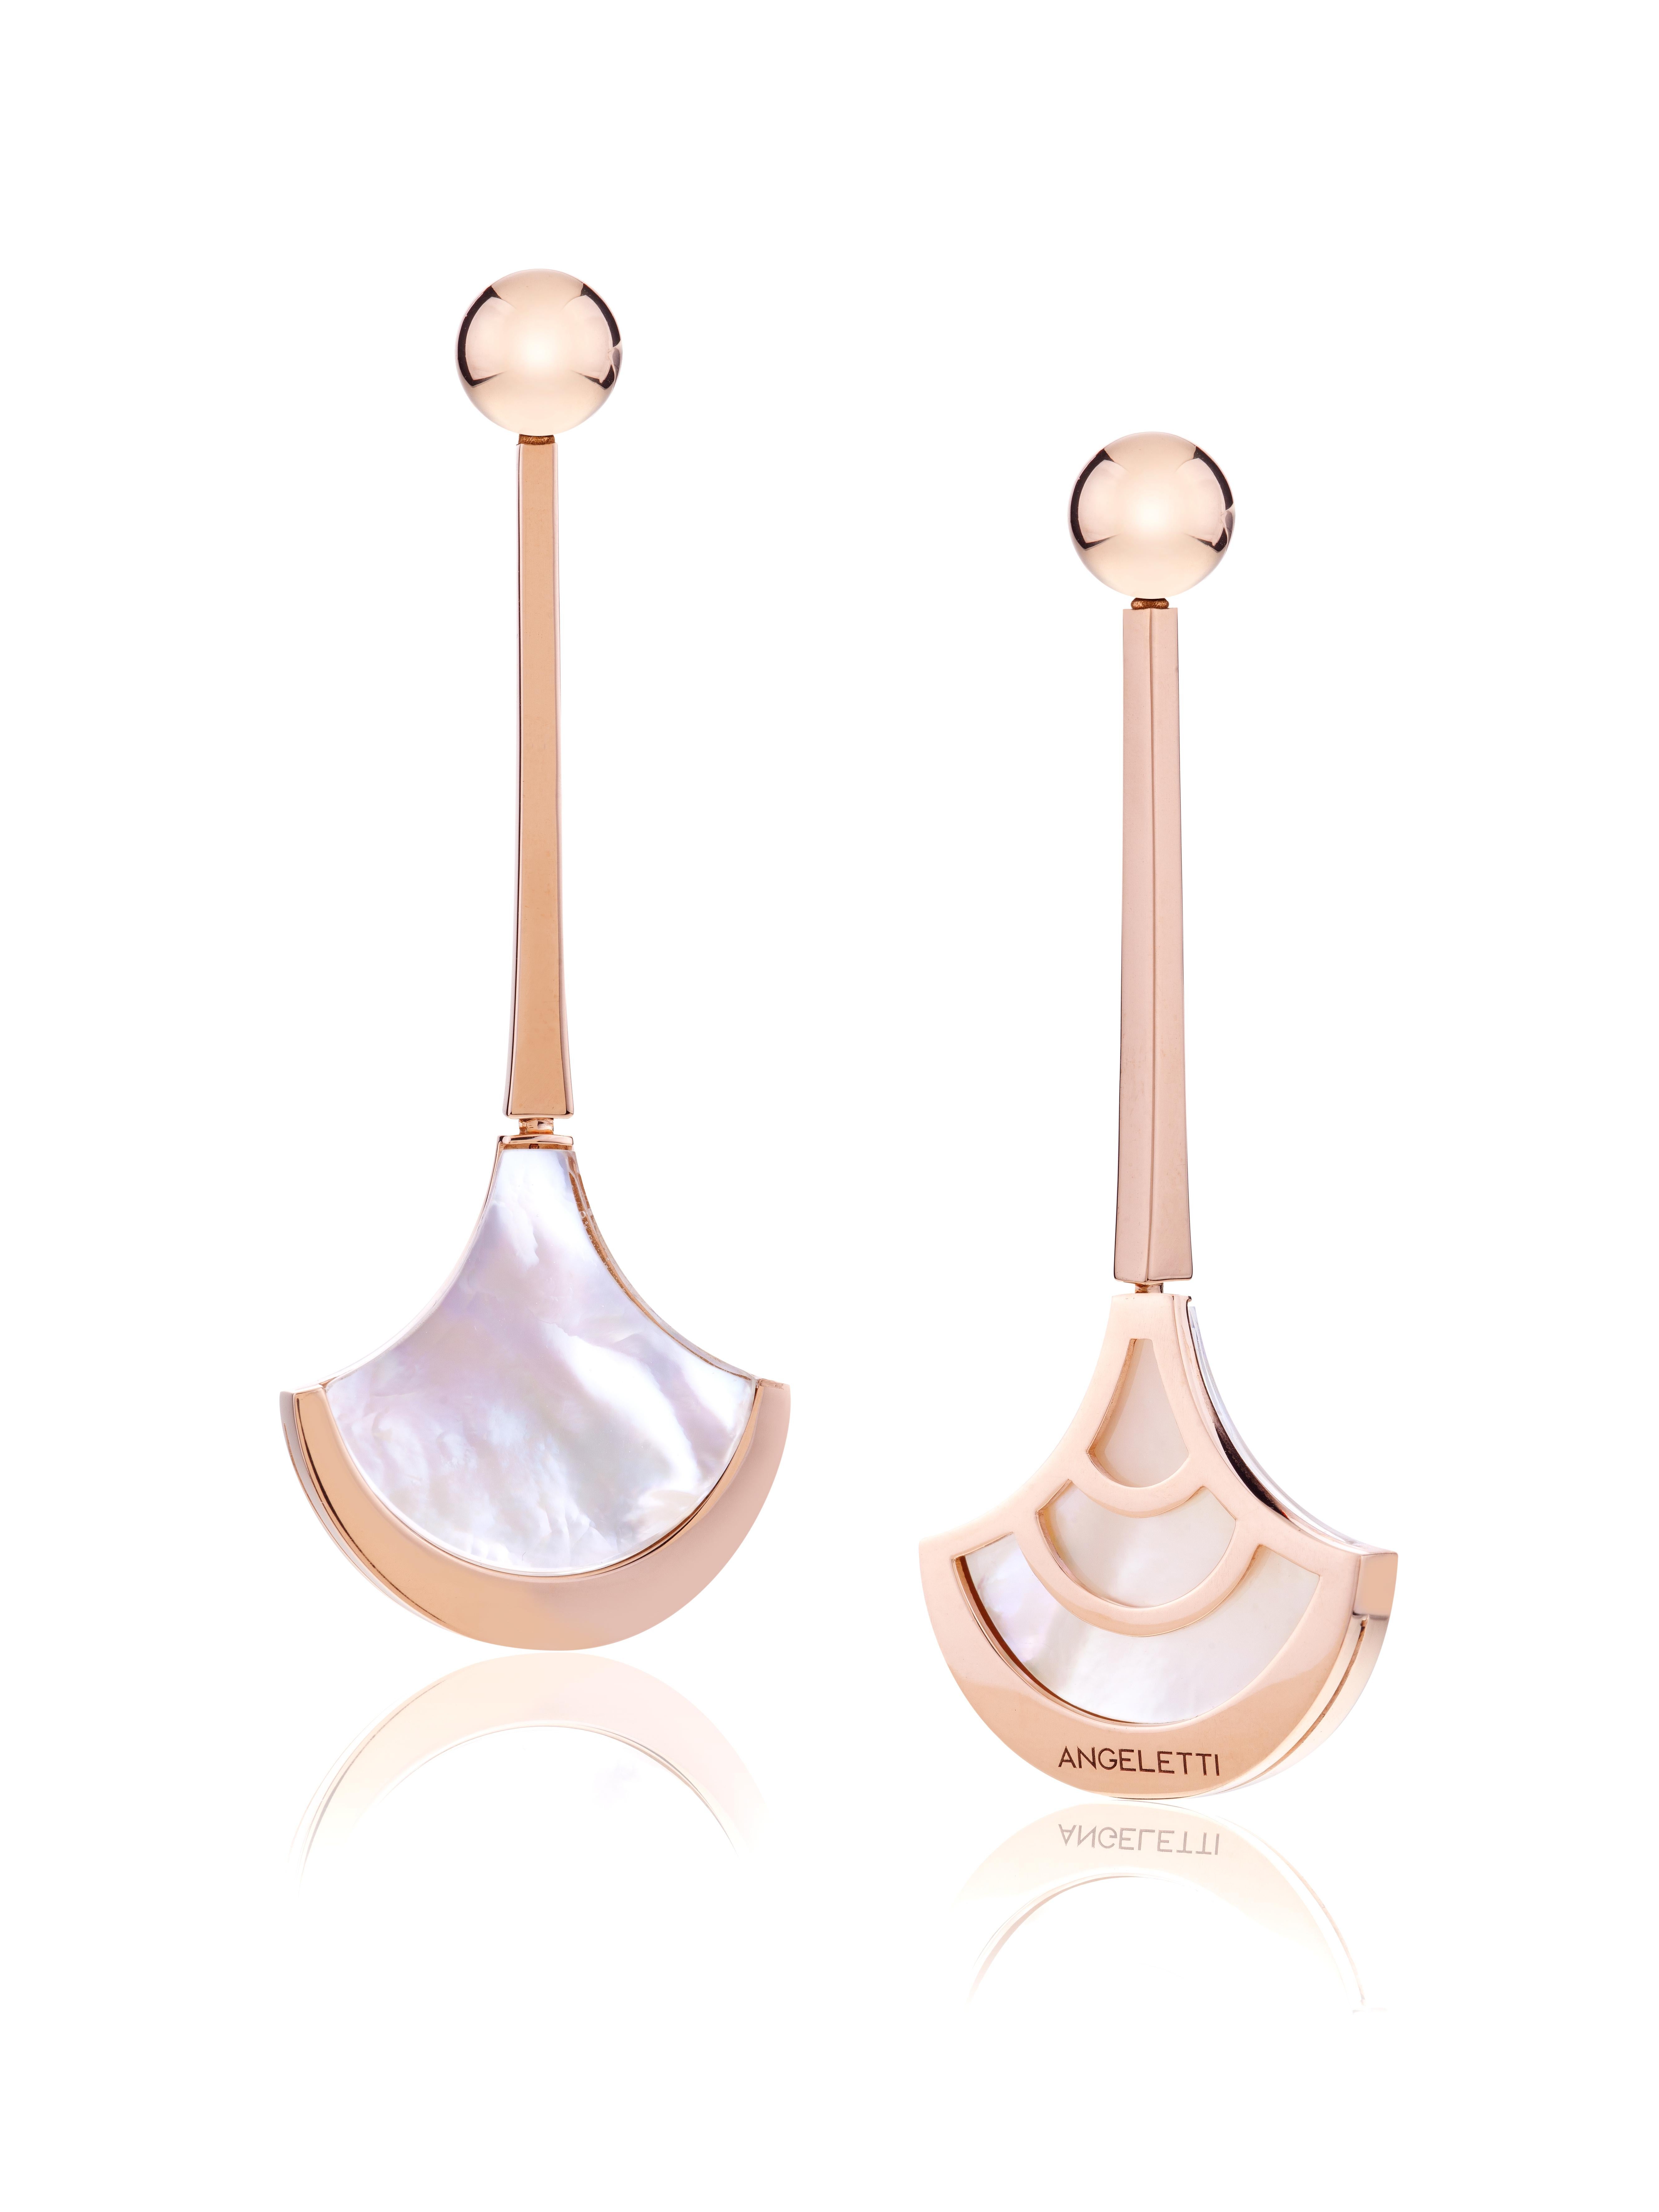 Earrings Rose Gold with Fan Shaped Mother of Pearl and Rock Crystal.
Everyday Earrings with precious doublette of Rock Crystal and Mother of Pearl with an extraordinary milky effect. 18kt Gold is around  20 grams. 
Angeletti Boasts an Exceptional